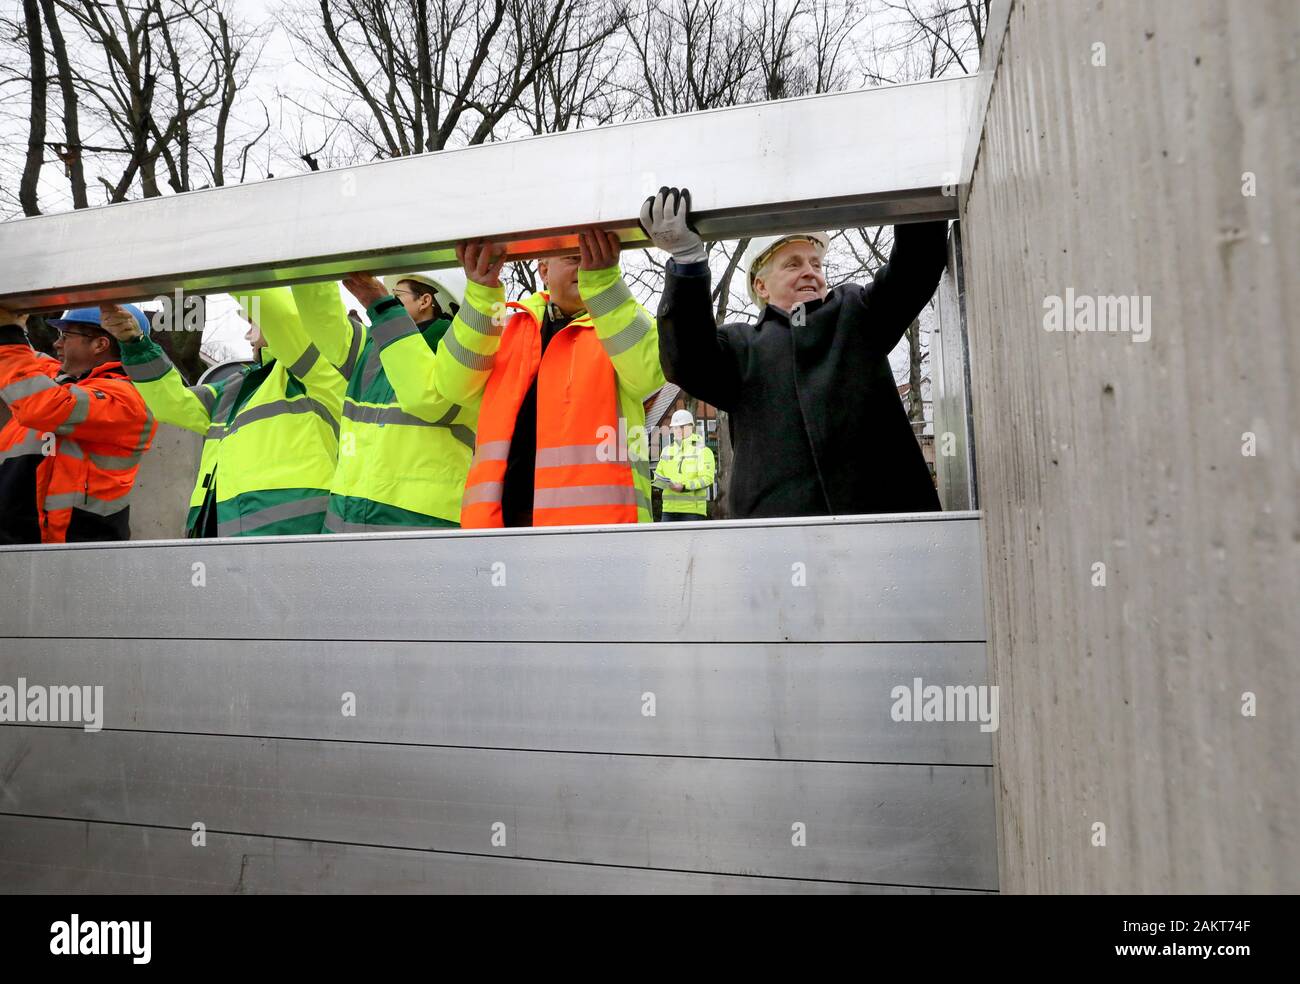 10 January 2020, Mecklenburg-Western Pomerania, Warnemünde: Till Backhaus (SPD, r), Minister of the Environment, helps to build a dam beam closure after the handover of the new storm surge protection wall at the southern Alter Strom, which can be used to close off passages in the wall if necessary. The structure, which is around 500 metres long, is 2.75 metres high and can therefore withstand water levels of up to 2.50. Due to the modular construction it is possible to raise the wall. Photo: Bernd Wüstneck/dpa-Zentralbild/dpa Stock Photo